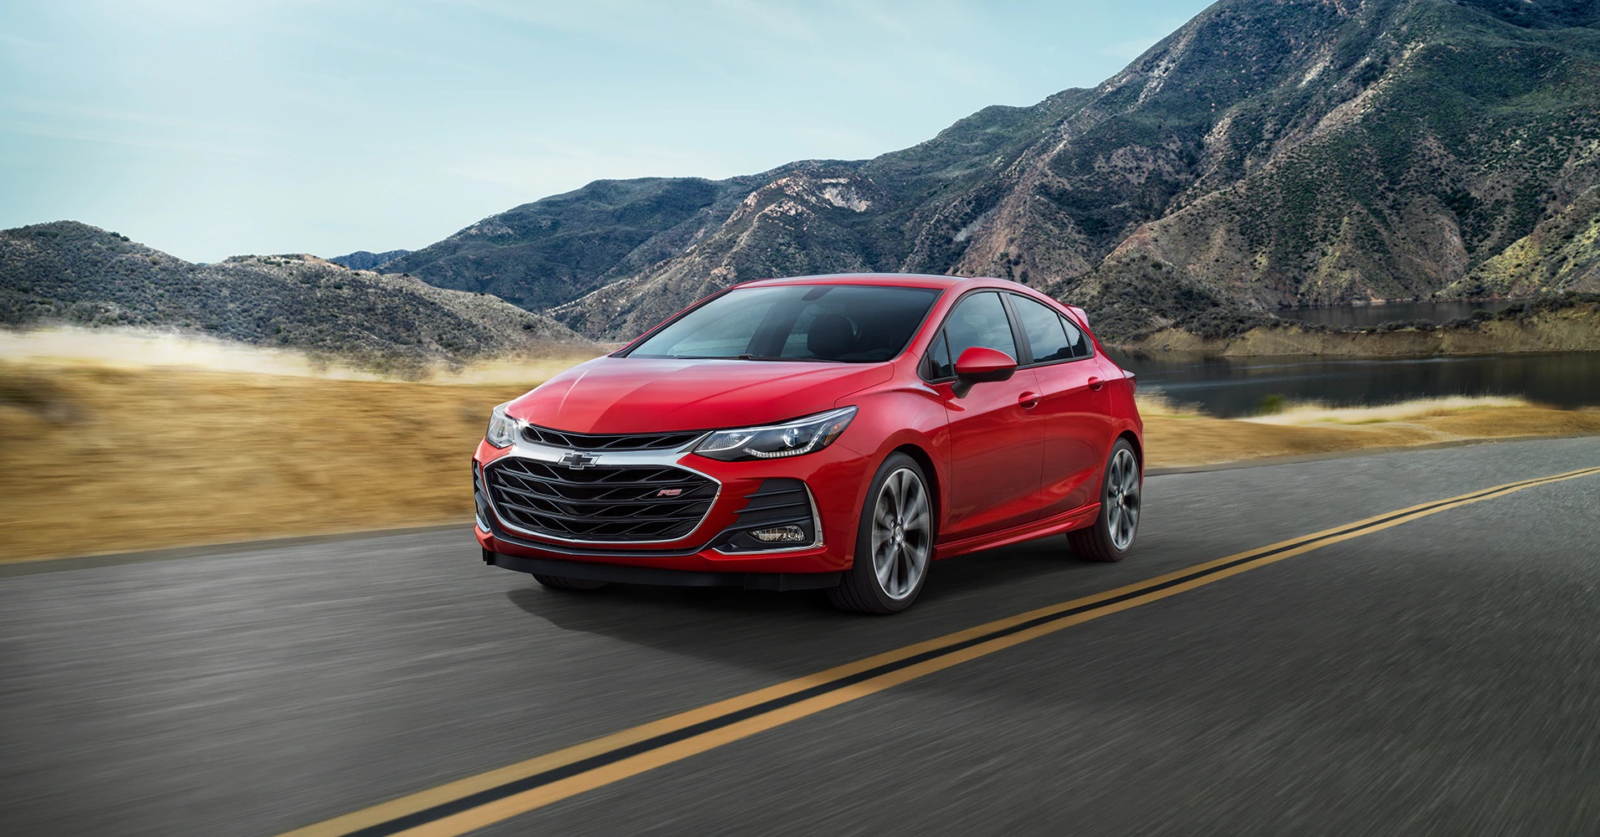 Find What Matters in the Chevrolet Cruze